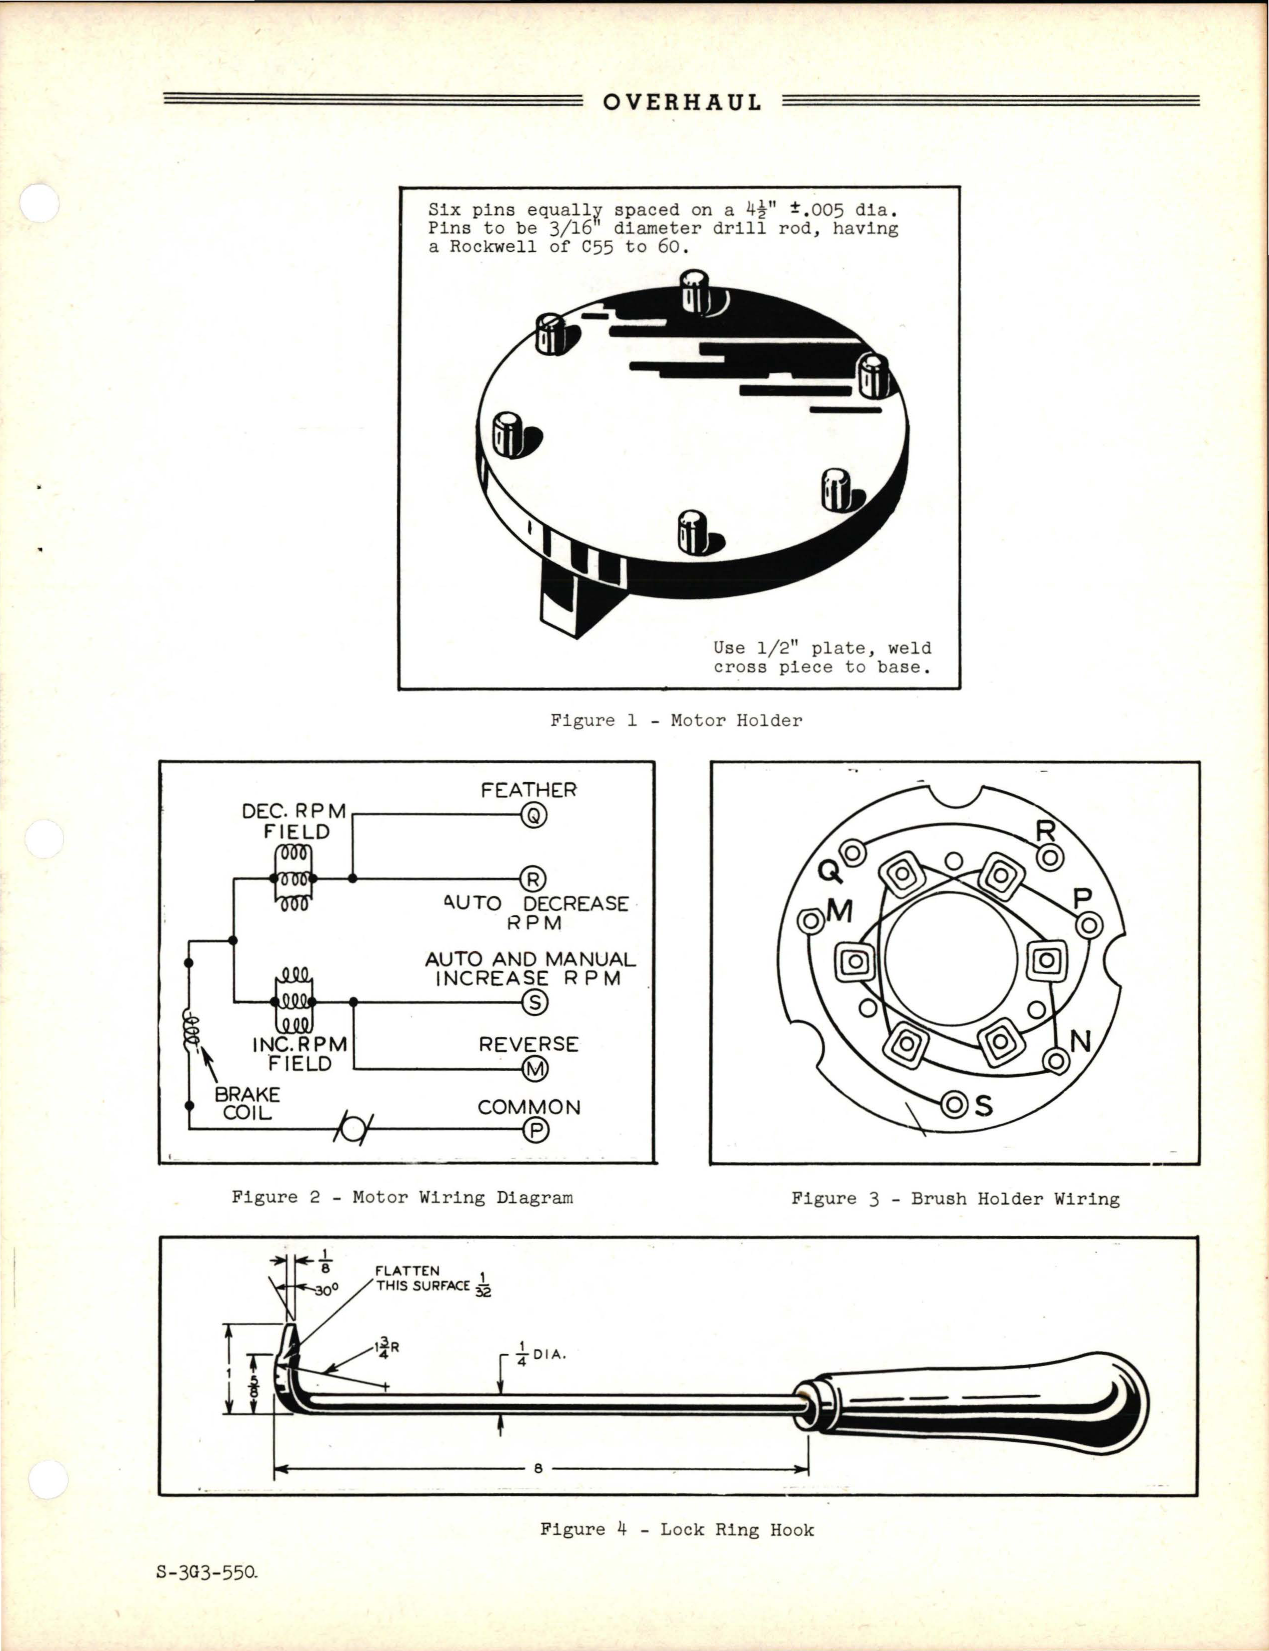 Sample page 9 from AirCorps Library document: Propeller Overhaul for Motor and Brake - Model C632S-B Series